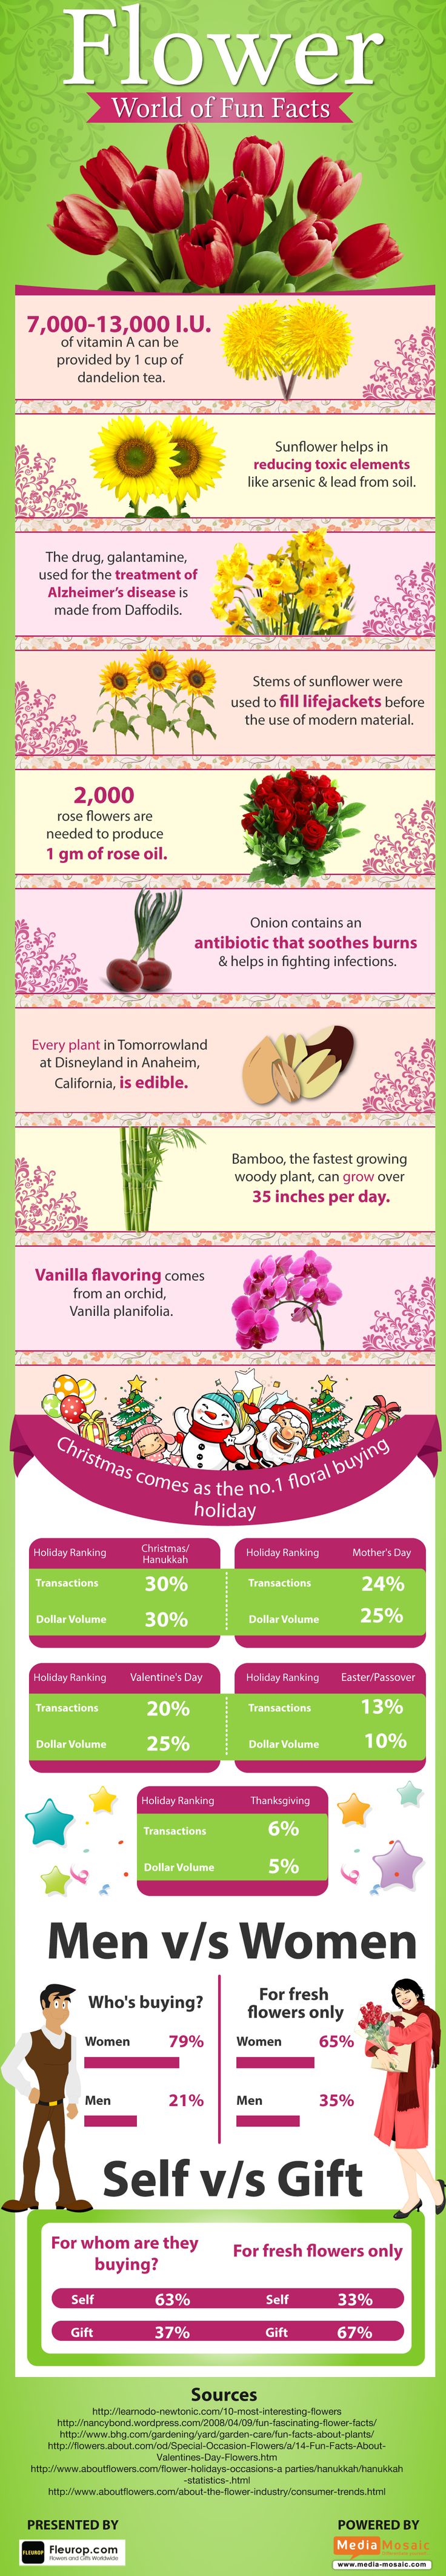 Flower World of Fun Facts [Infographic]